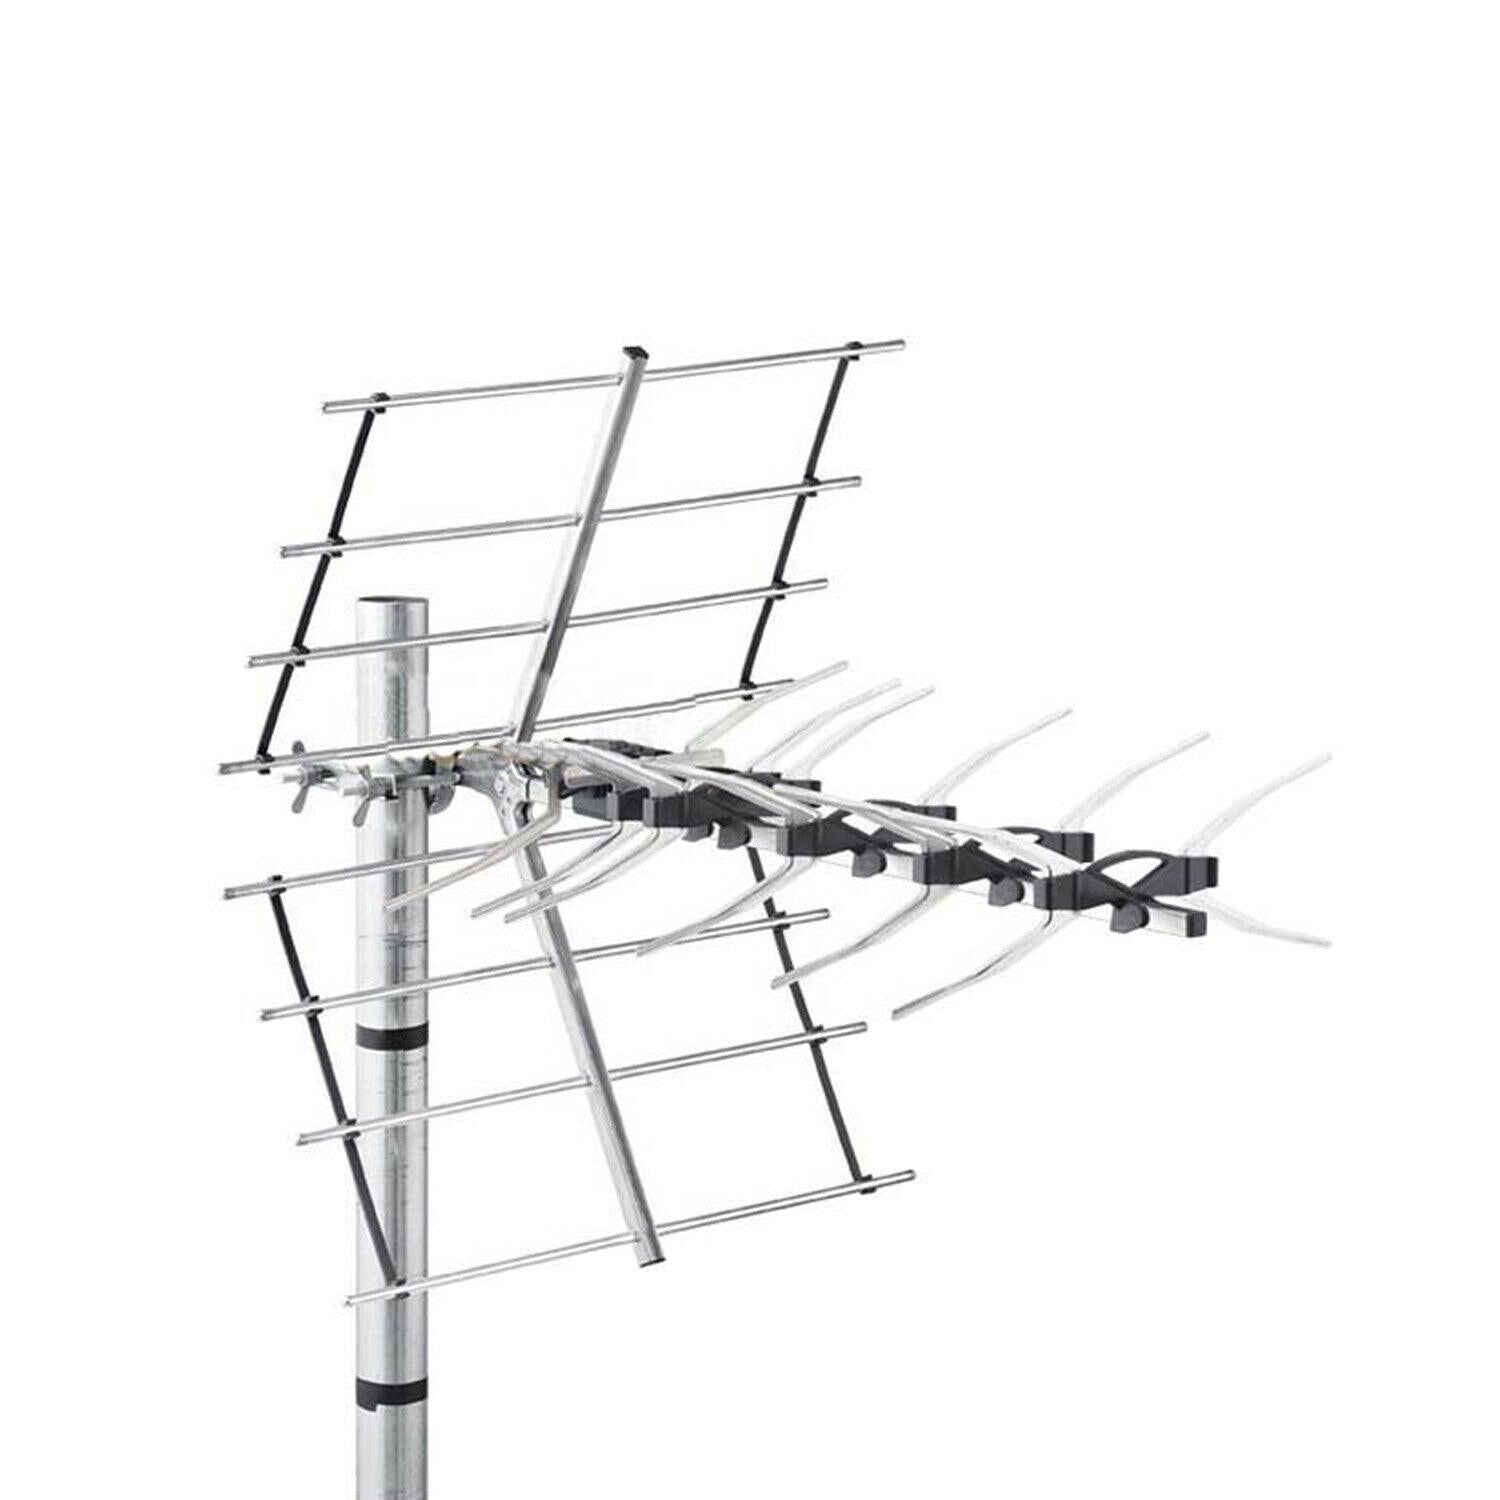 Image shows a front view of the 32 Element UHF TV Aerial